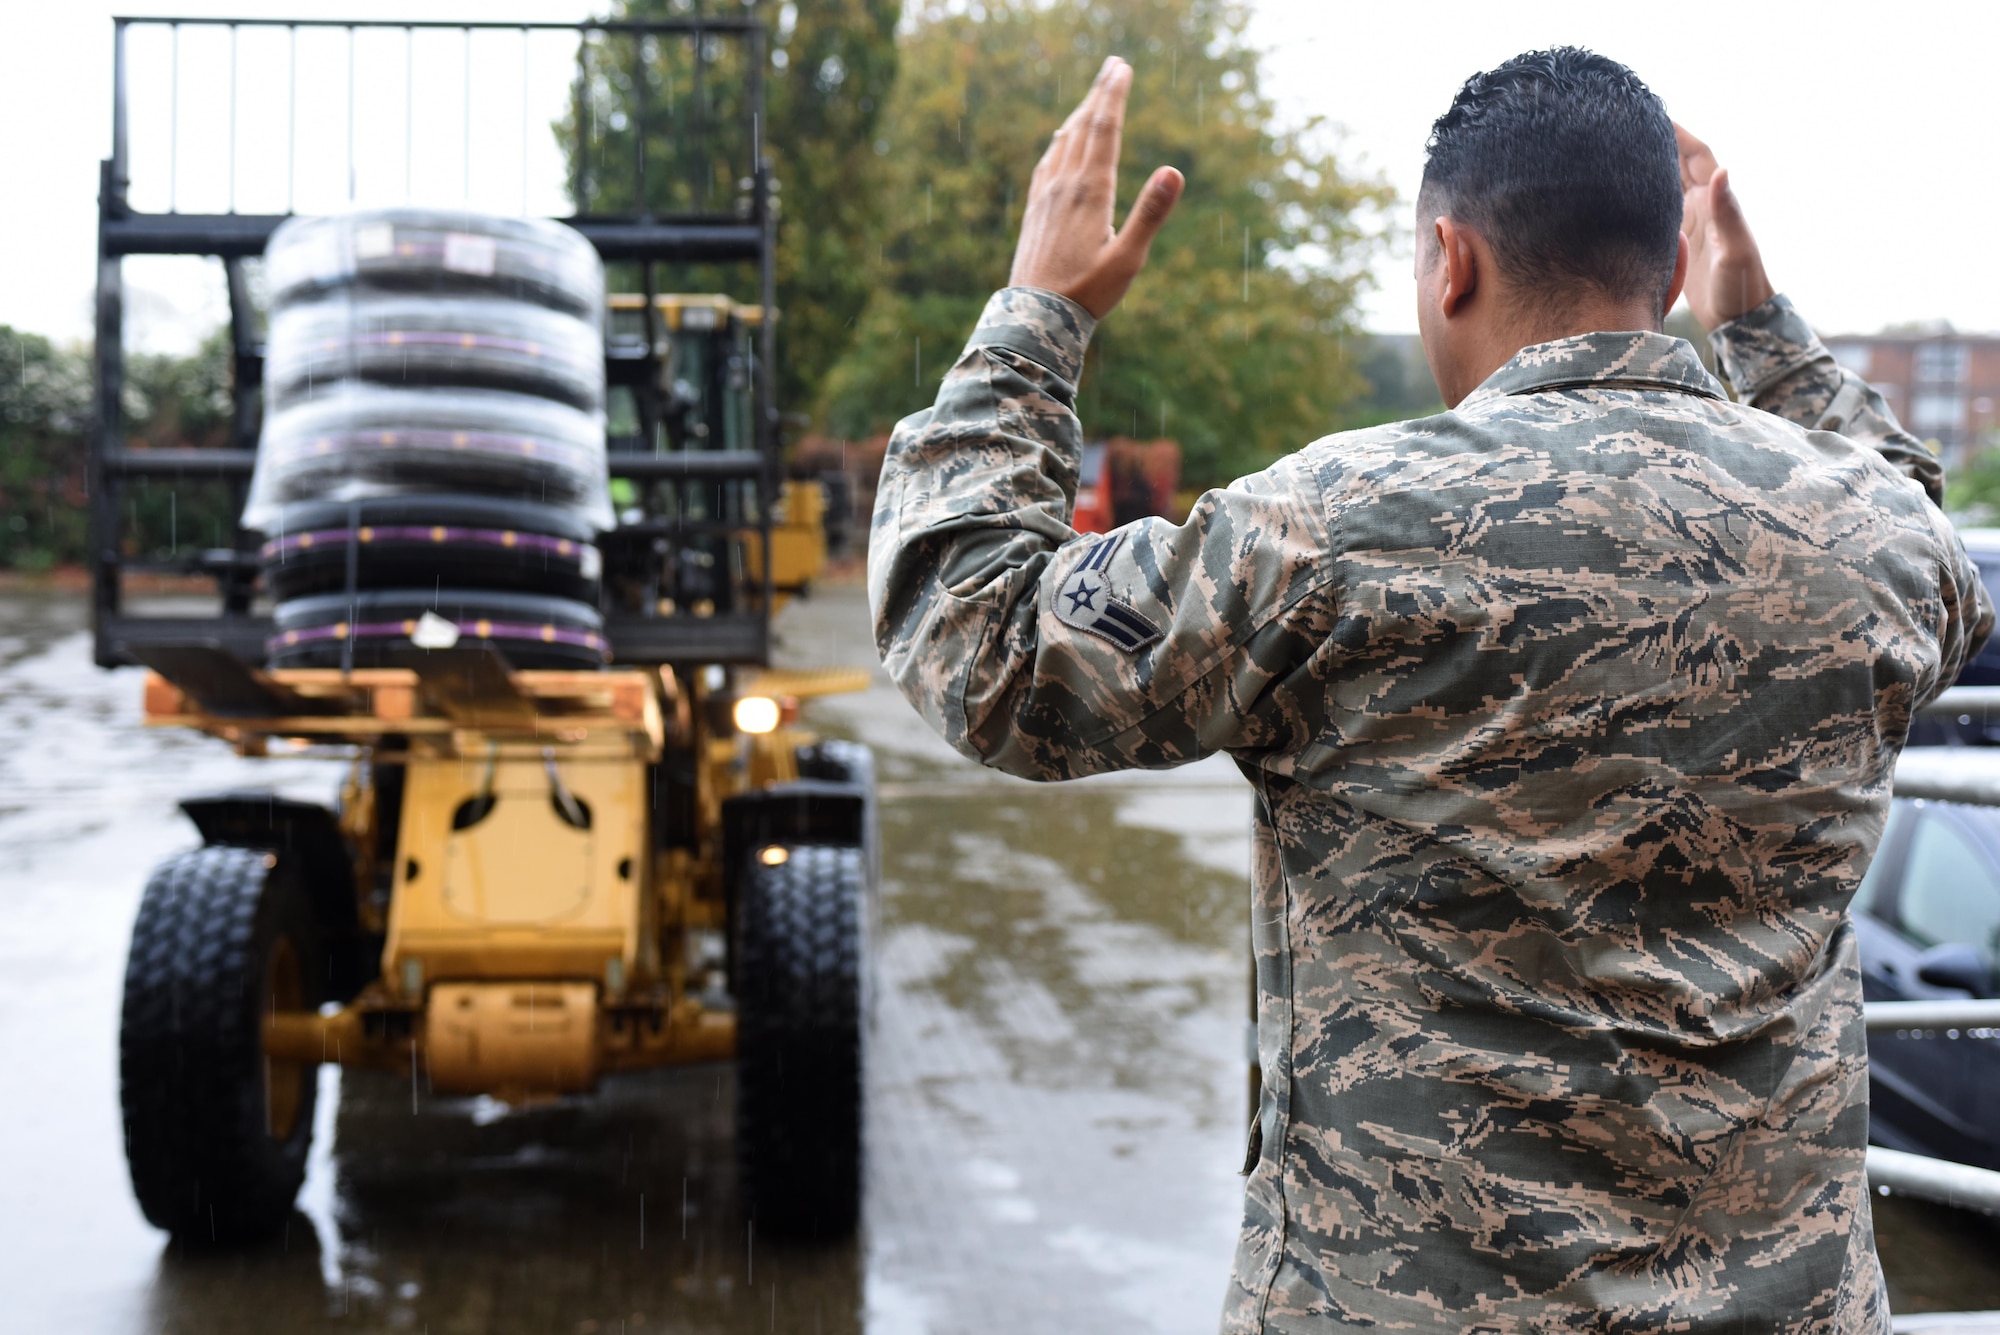 An Airman assigned to the 48th Logistics Readiness Squadron marshals in a forklift at Royal Air Force Lakenheath, England, Oct. 18. The ground transportation element of the 48th LRS is responsible for transporting parts, equipment and Airmen anywhere they are needed. (U.S. Air Force photo/Airman 1st Class Eli Chevalier)